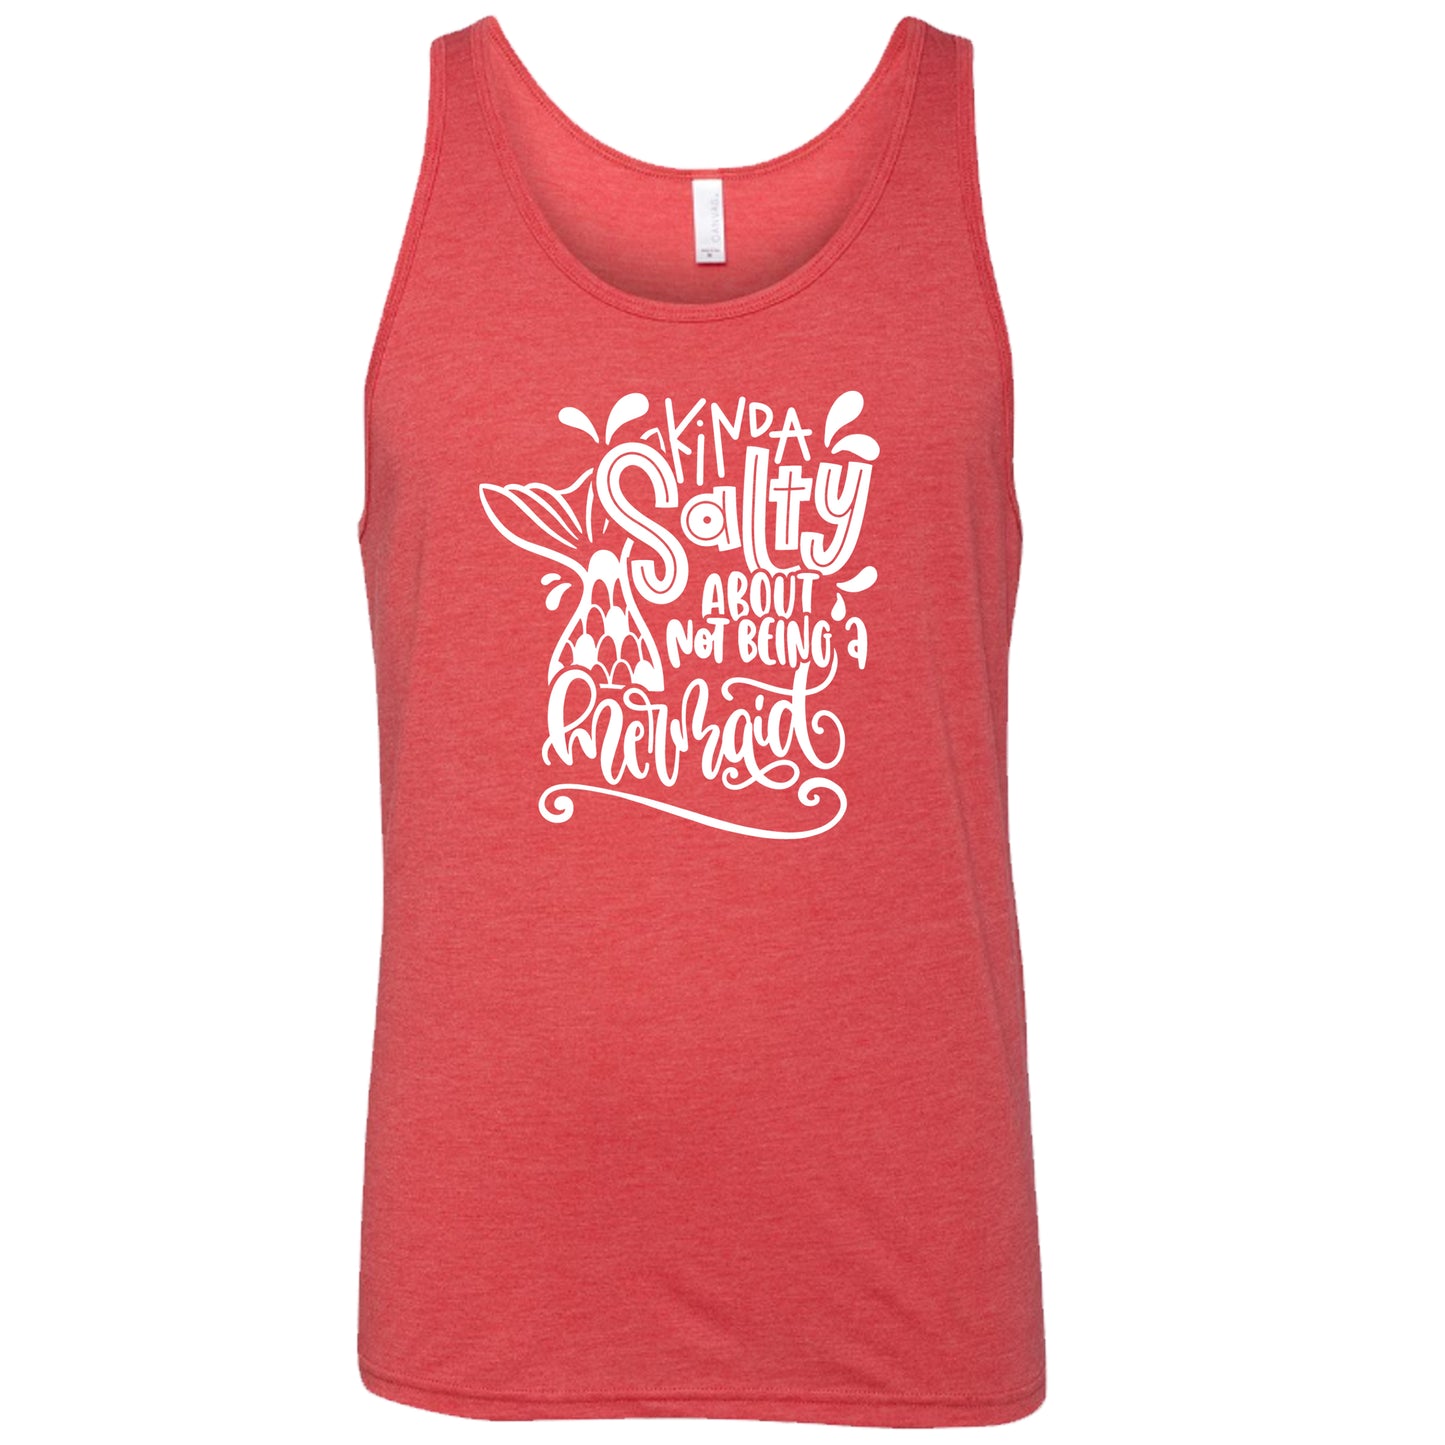 red unisex tank with the saying "kinda salty about not being a mermaid" in the center